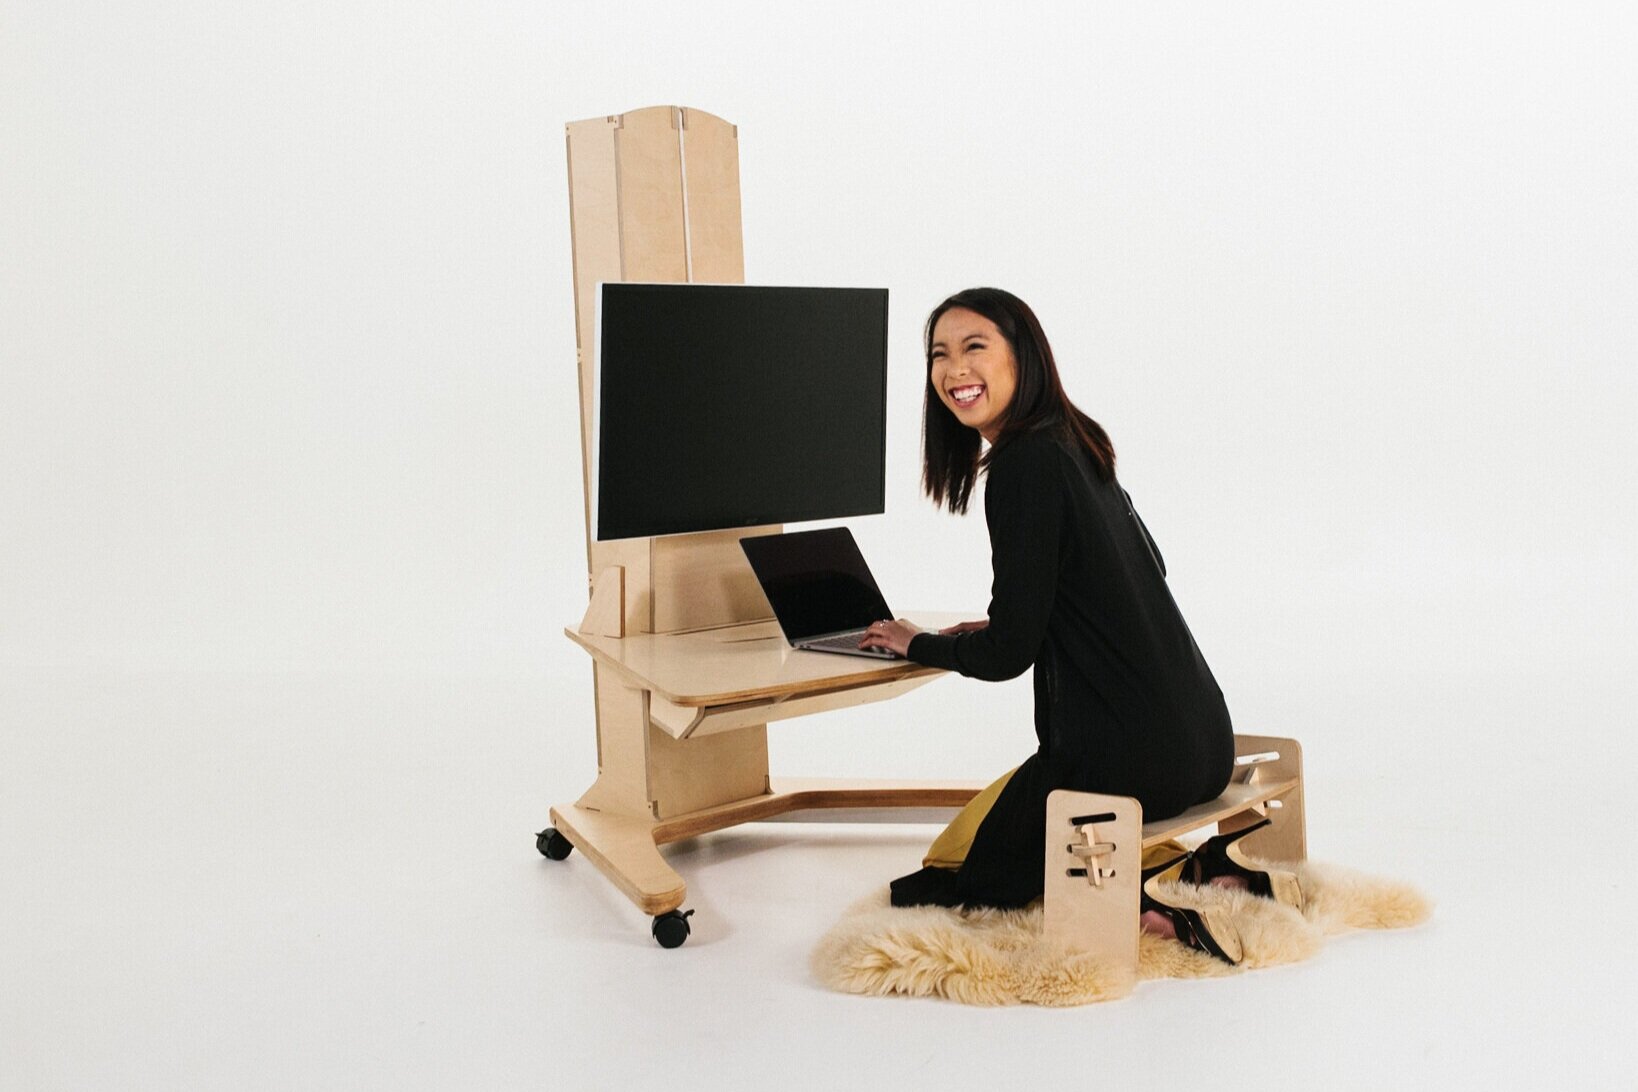 This is the low setup on a Limber Desk, supported by the Limber Stool to make floor positions more comfortable.